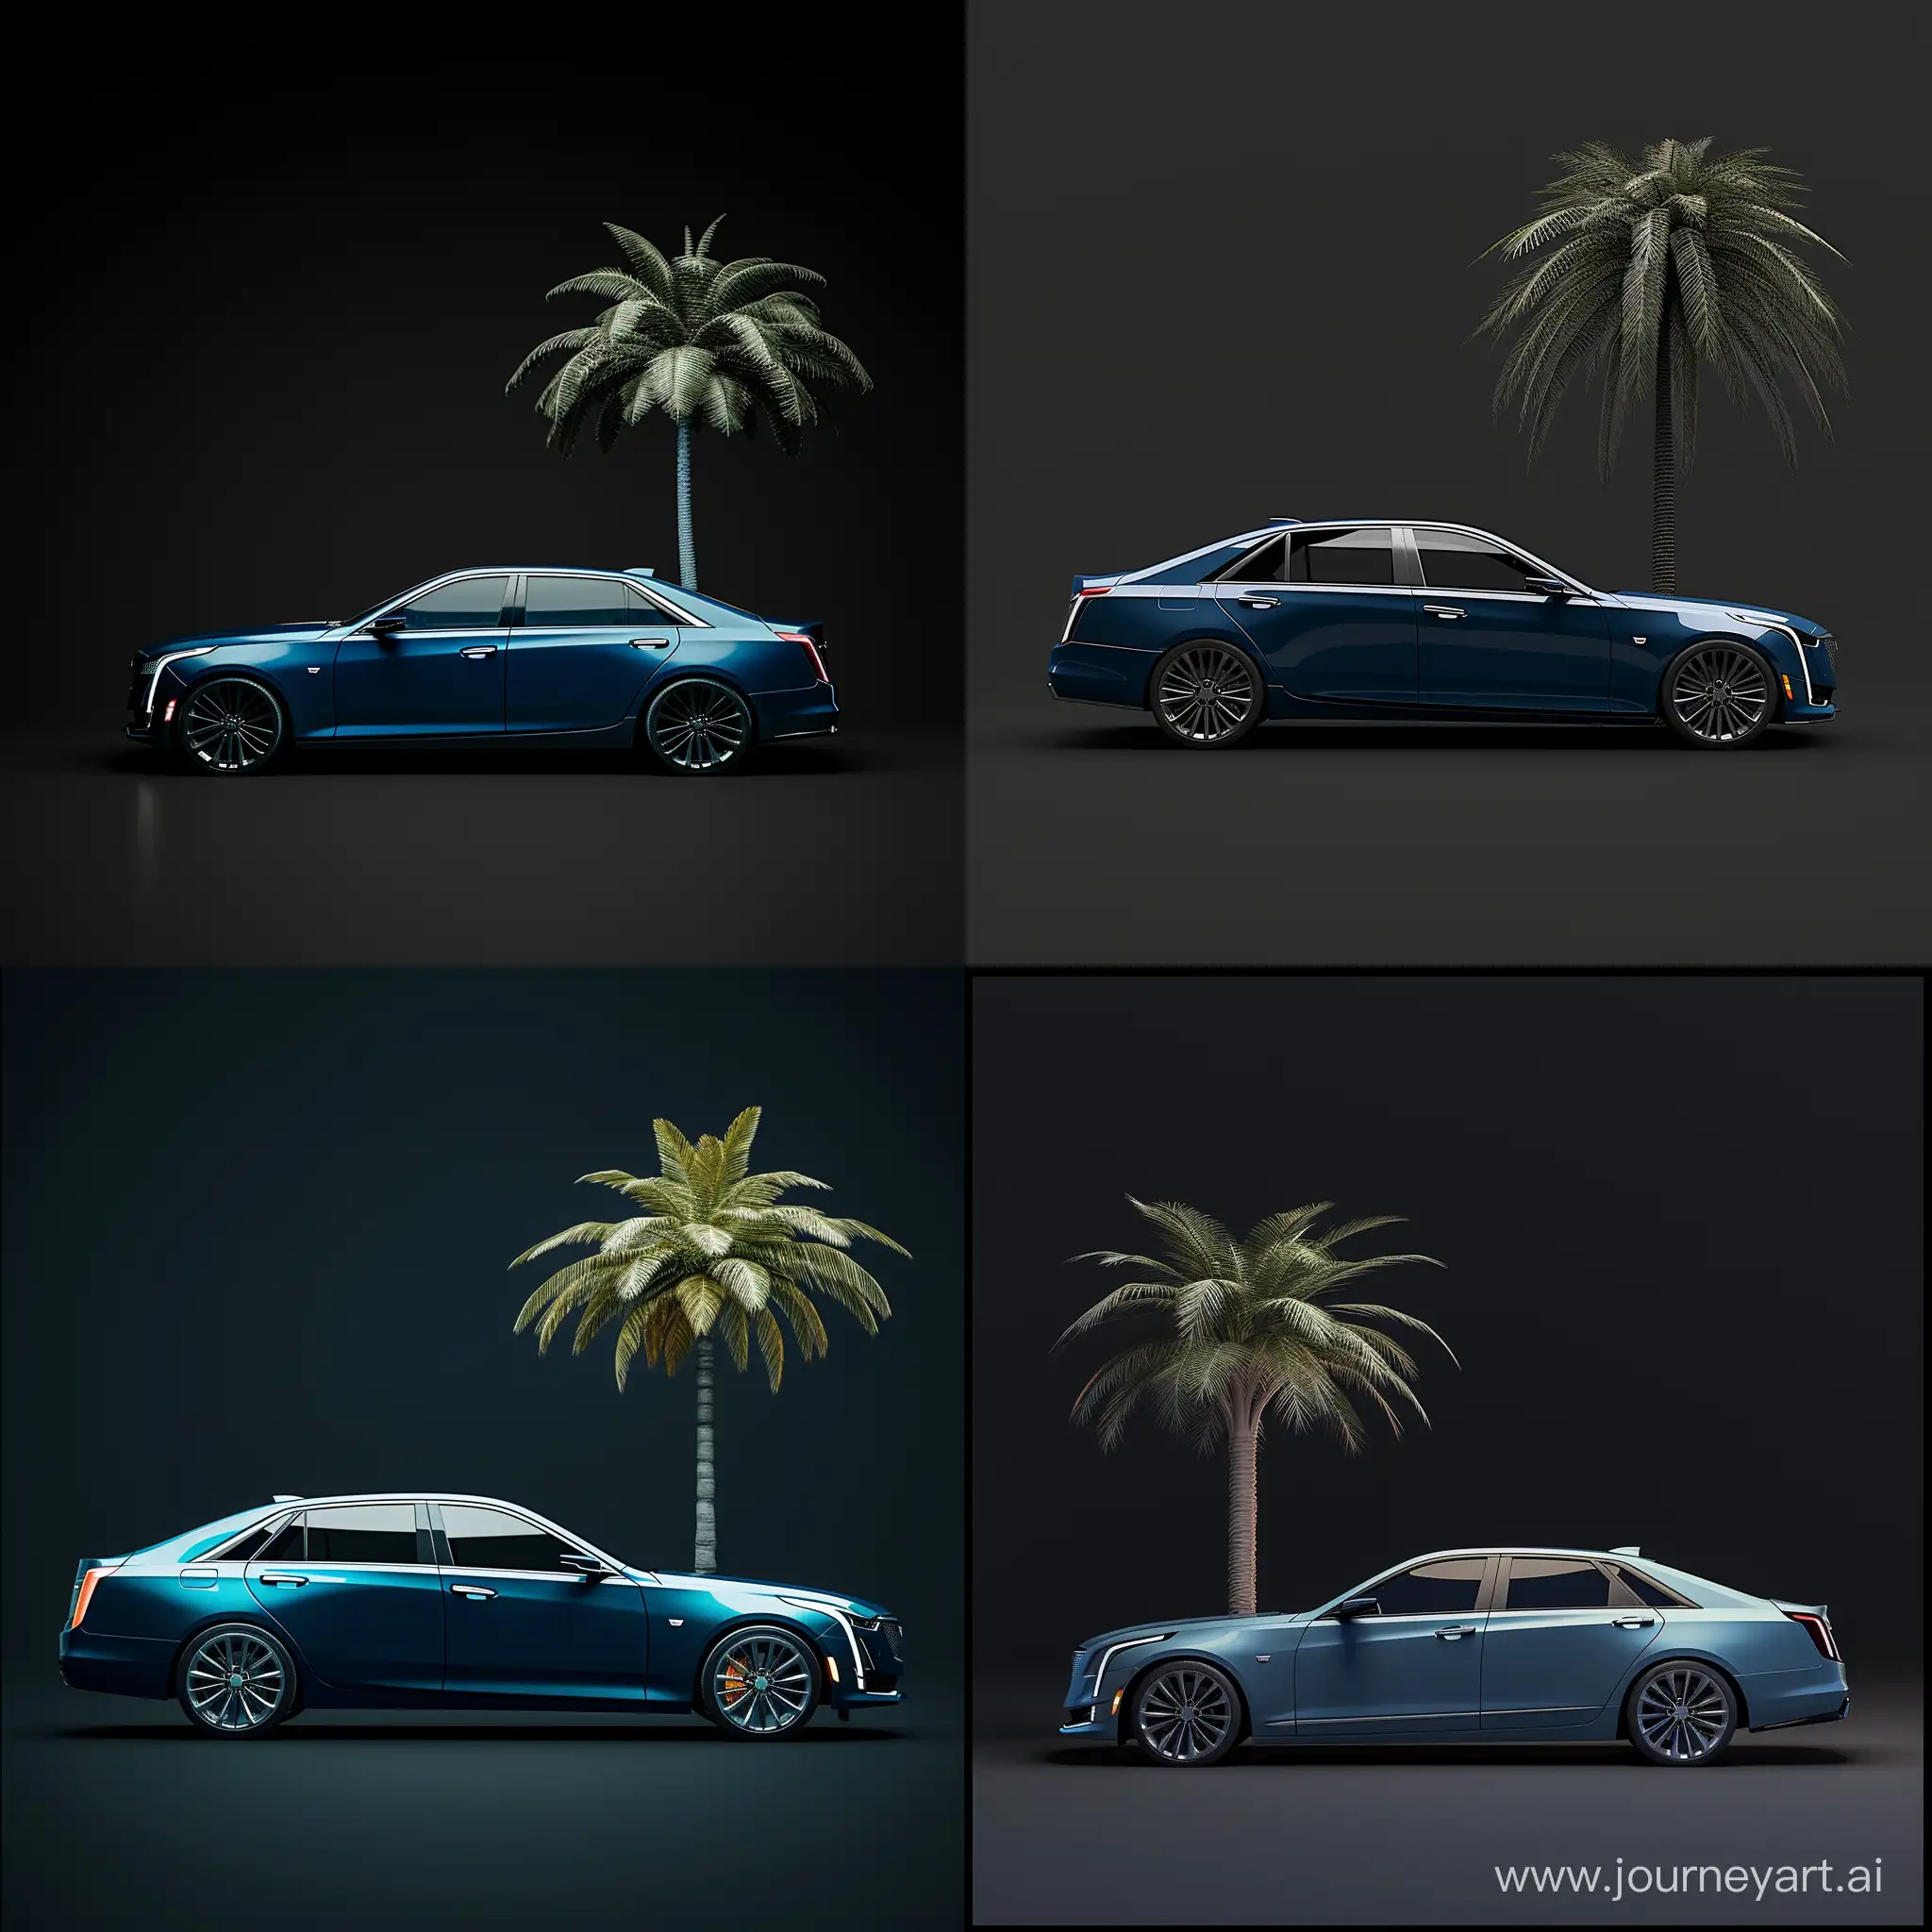 3D-Minimalist-Cadillac-CT5-Model-with-Blue-Body-Color-and-Palm-Tree-Background